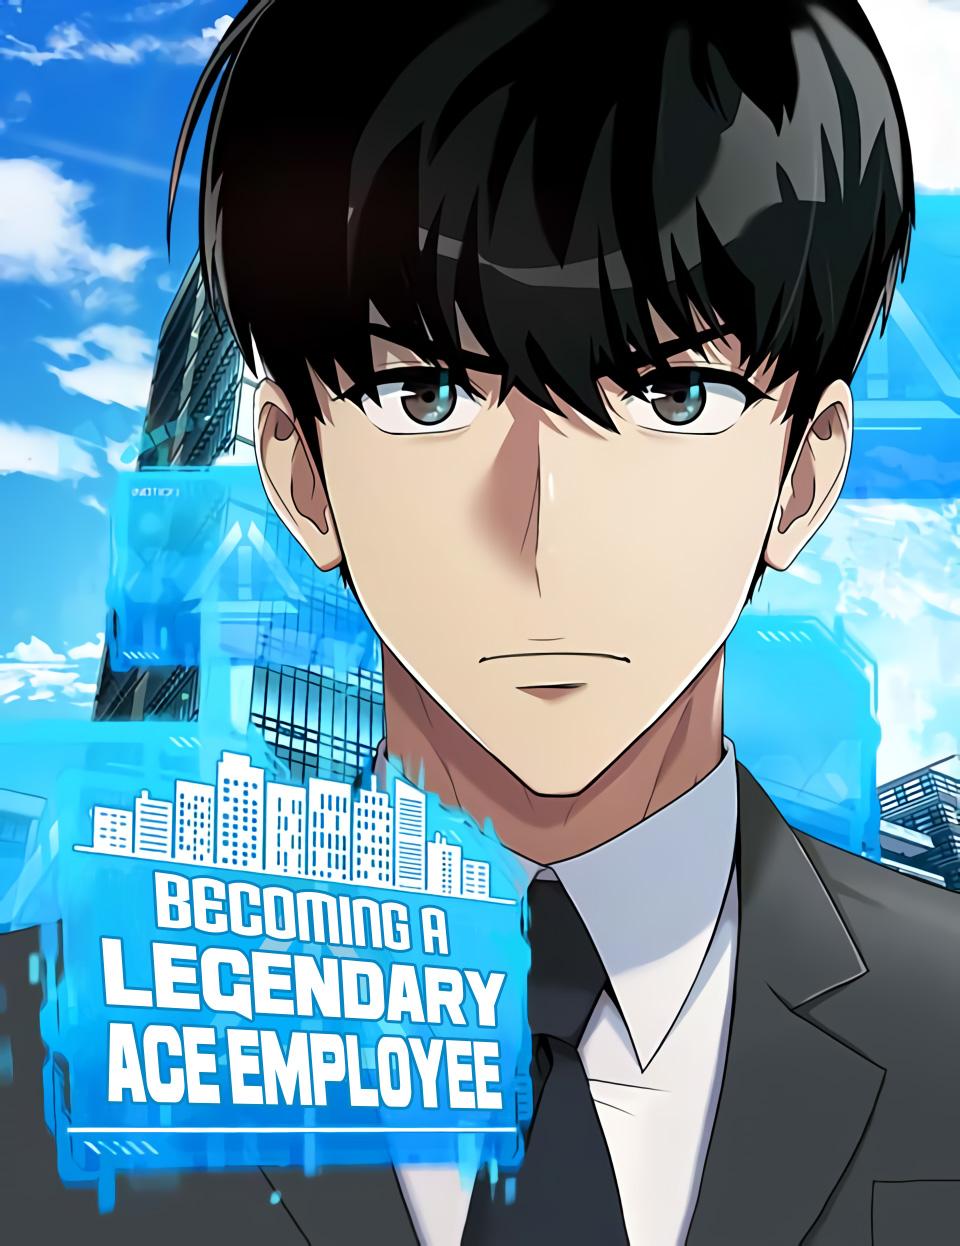 Becoming A Legendary Ace Employee cover image